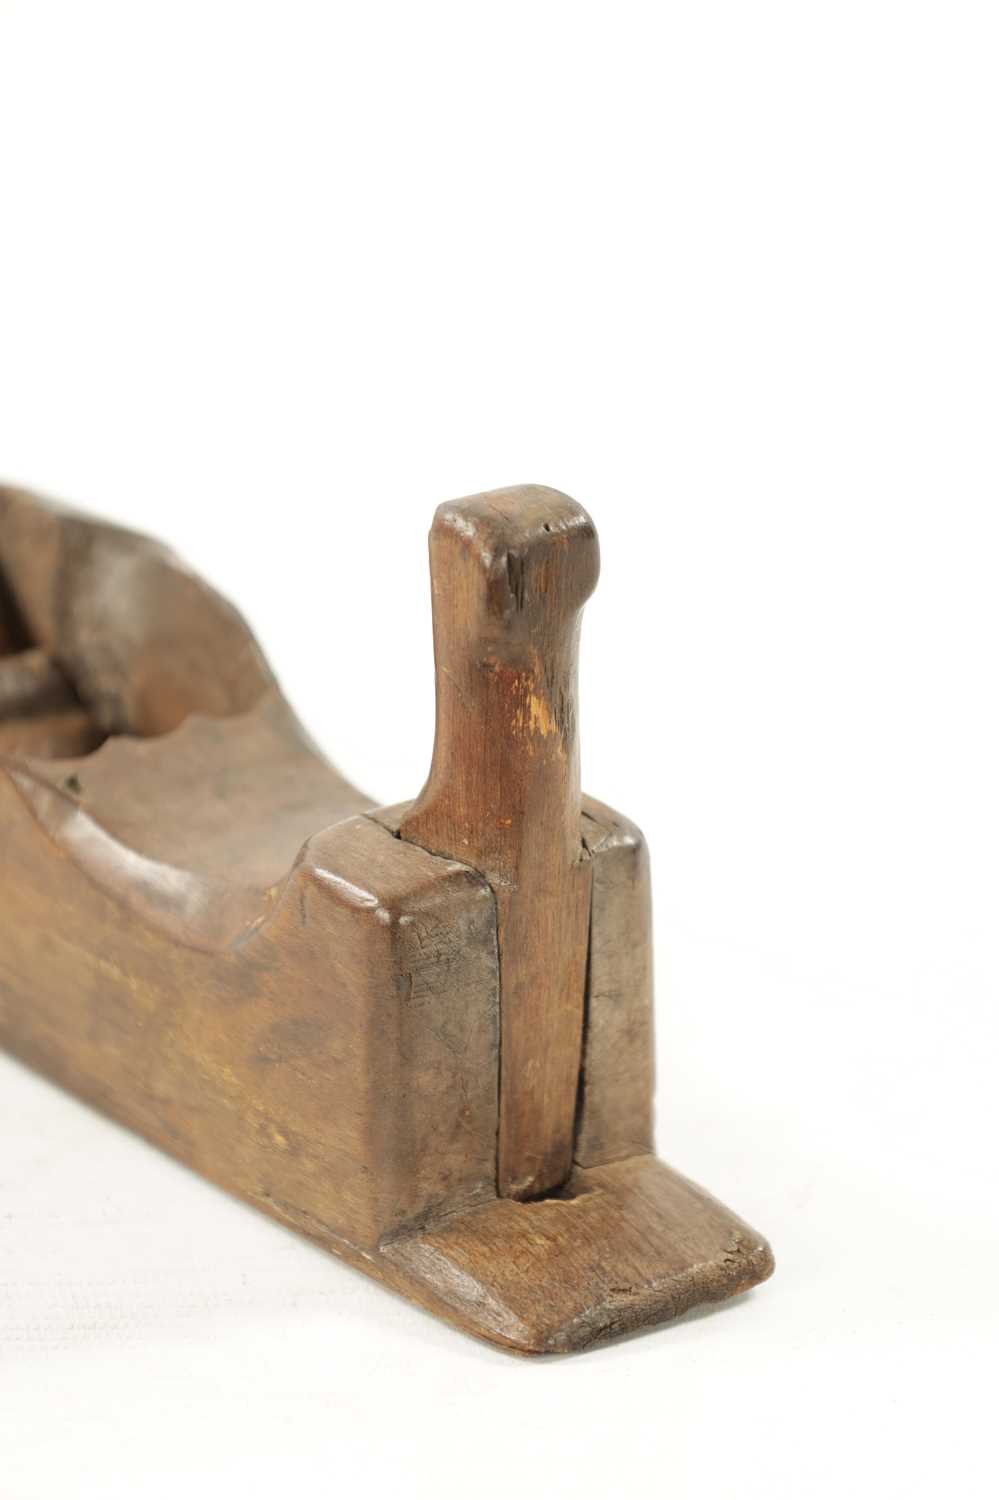 A RARE EARLY 18TH CENTURY WOODEN PLANE - Image 4 of 6